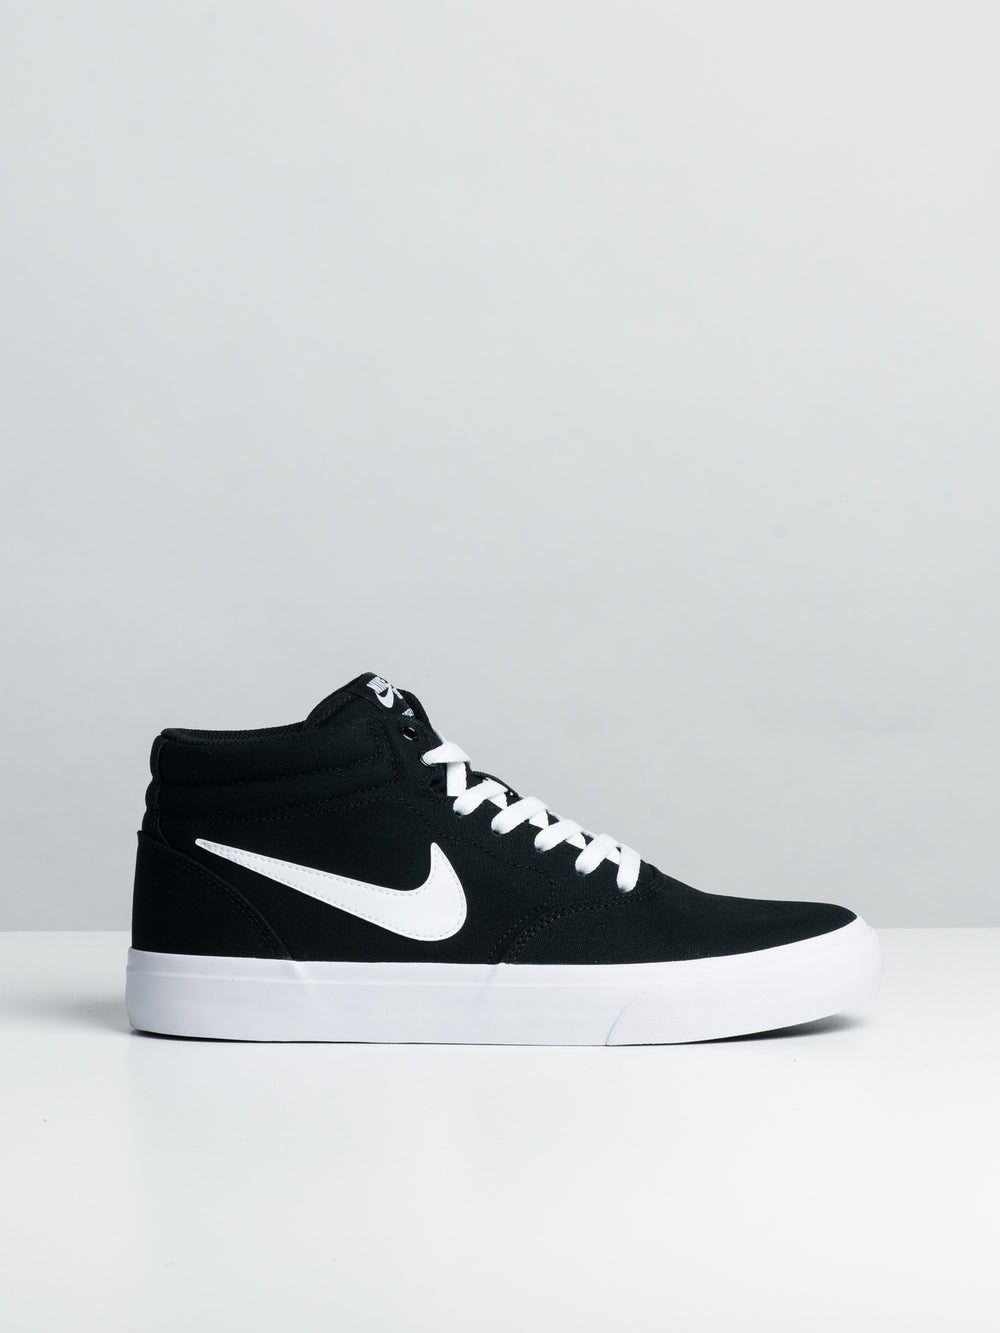 MENS NIKE SB CHARGE MID CANVAS SNEAKERS - CLEARANCE